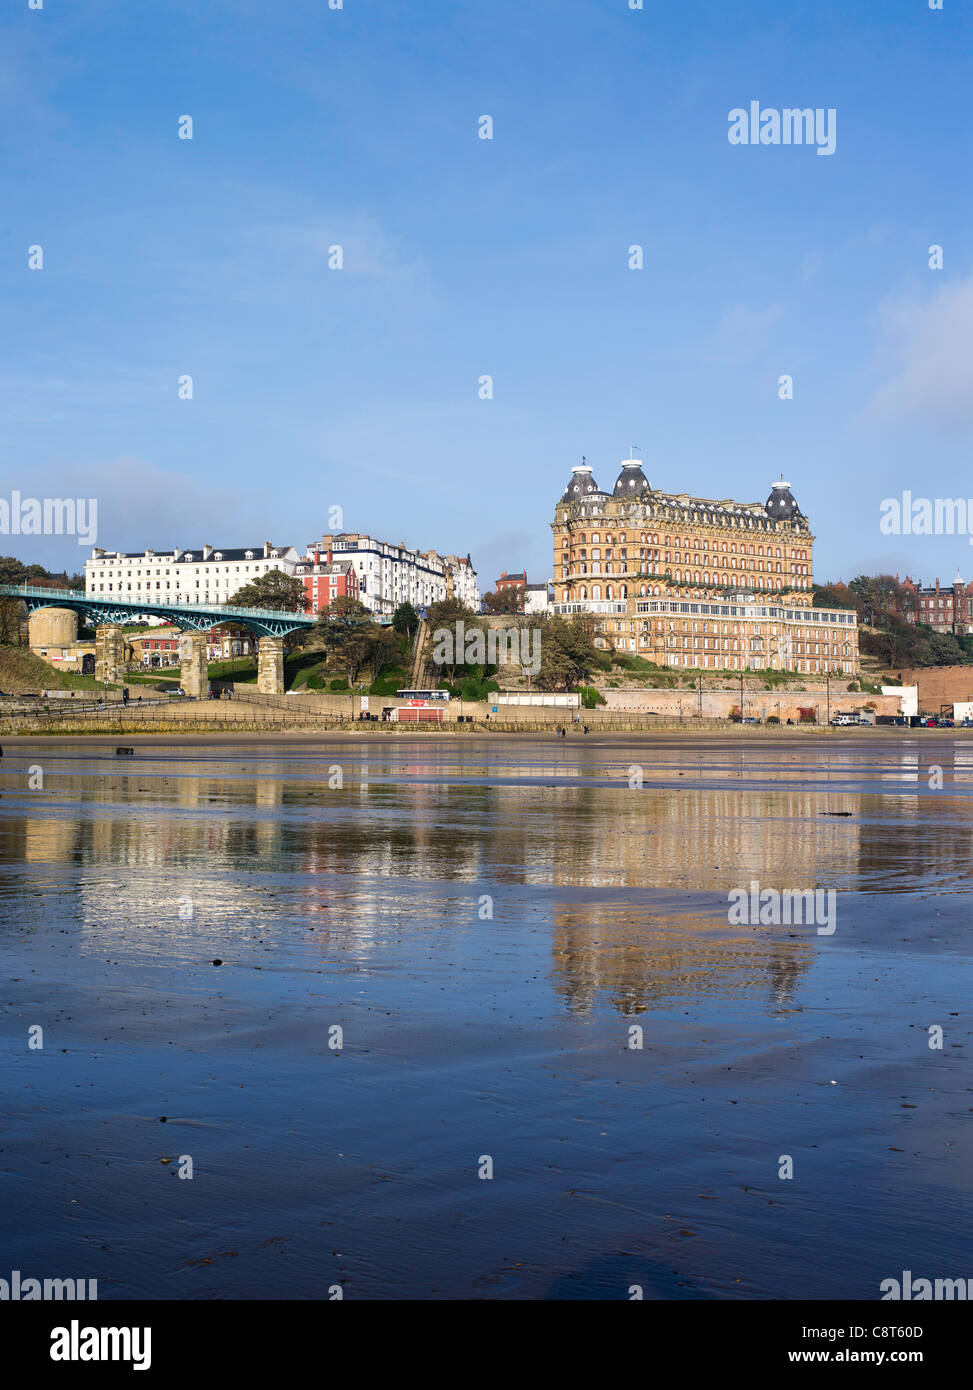 dh South Bay SCARBOROUGH NORTH YORKSHIRE The Spa Bridge and The Grand Hotel Scarborough beach uk english seaside Stock Photo